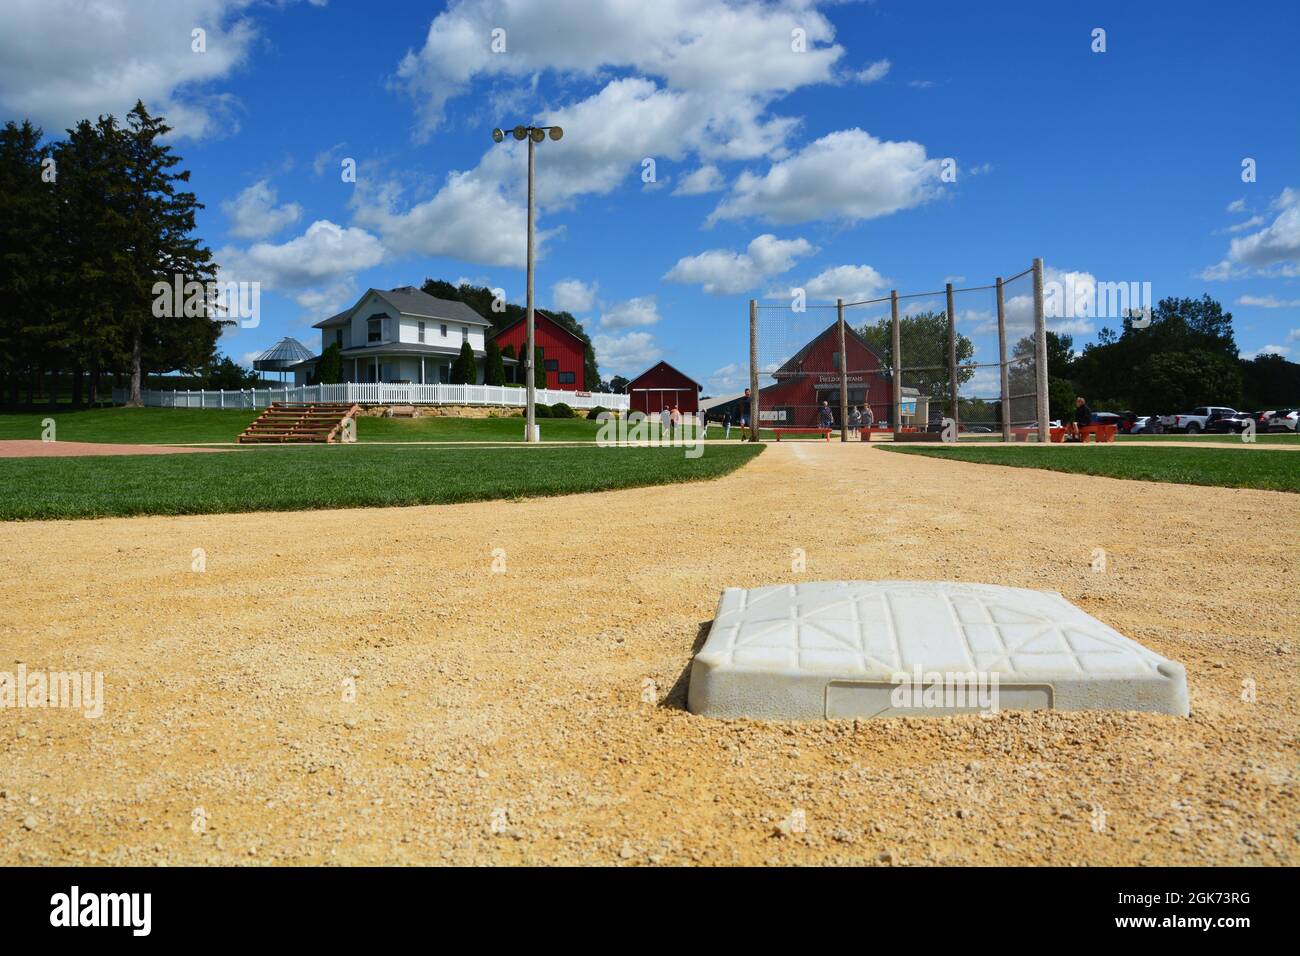 Looking down the third base line at the former movie set of The Field of Dreams in Dyersville Iowa. Focus is on the base. Stock Photo